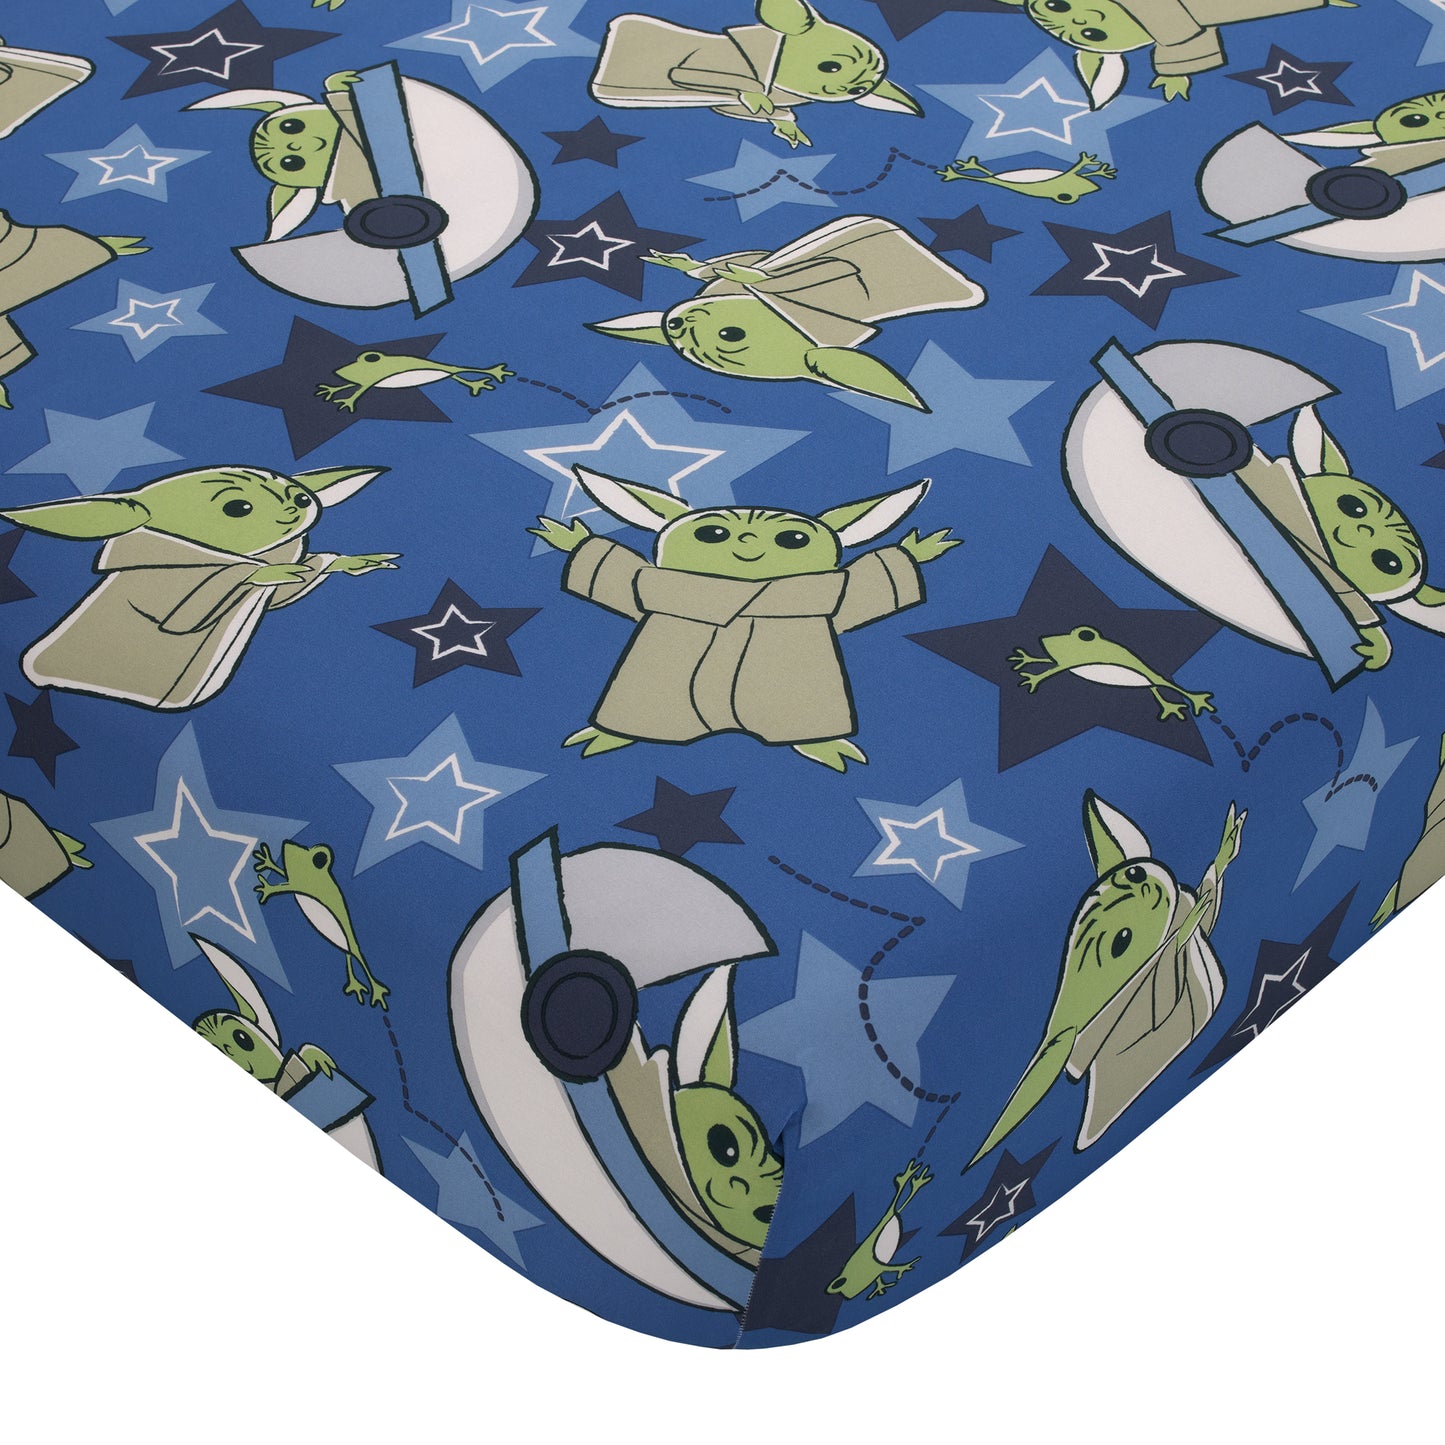 Star Wars The Child Cutest in the Galaxy Blue, Green and Gray, "Too Cute" Grogu, Stars, Hover Pod, and Sorgan Frog 4 Piece Toddler Bed Set - Comforter, Fitted Bottom Sheet, Flat Top Sheet, and Reversible Pillowcase